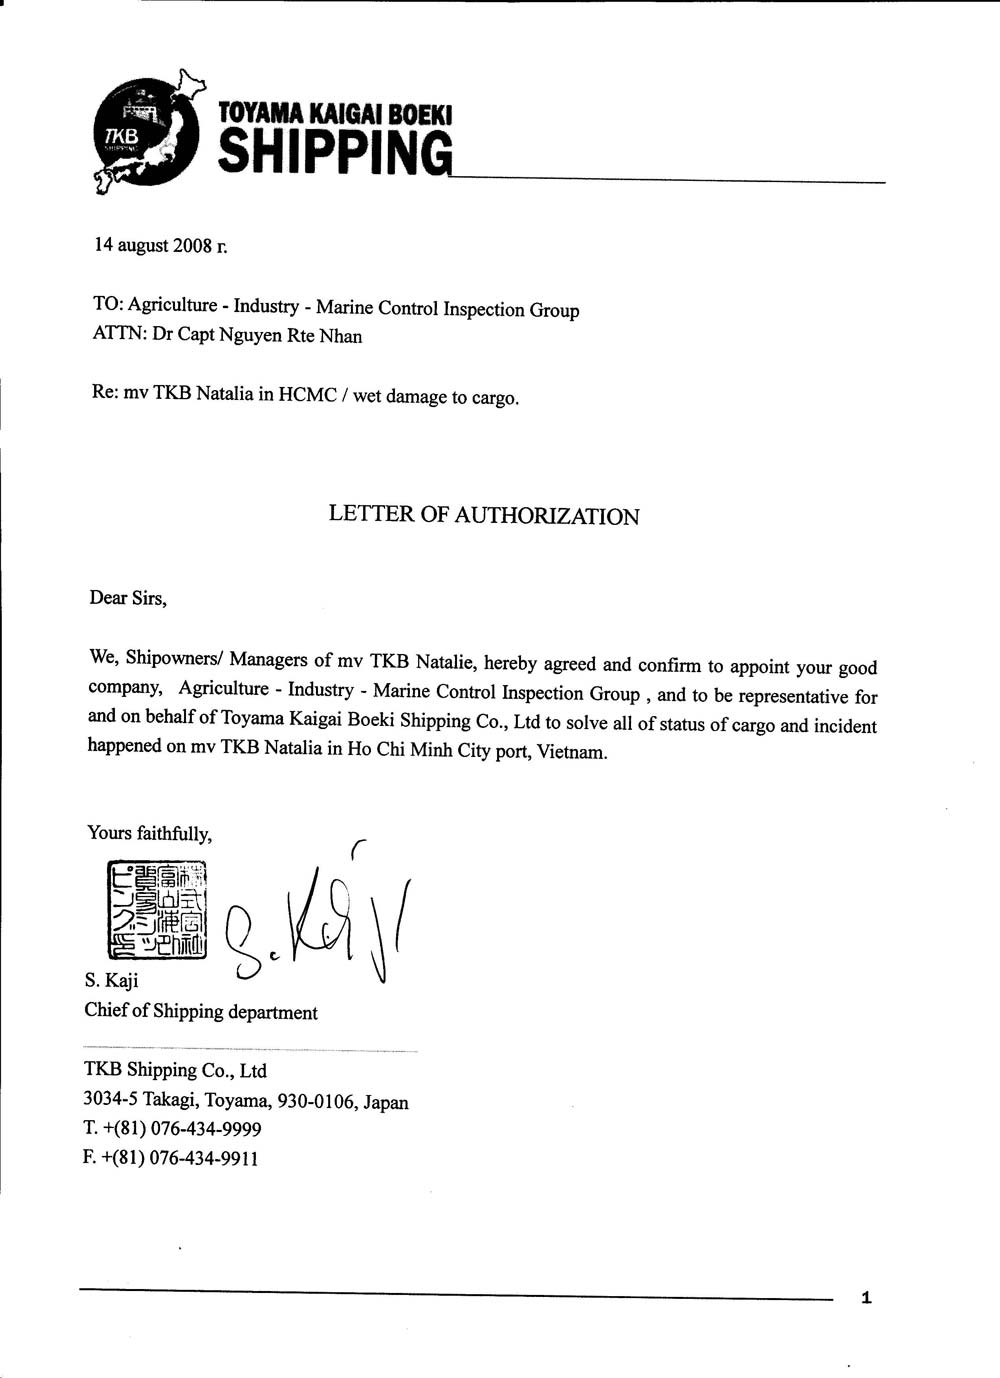 Authority_Letter_of_shipowner_to_AIM_Control_SURVEYORS